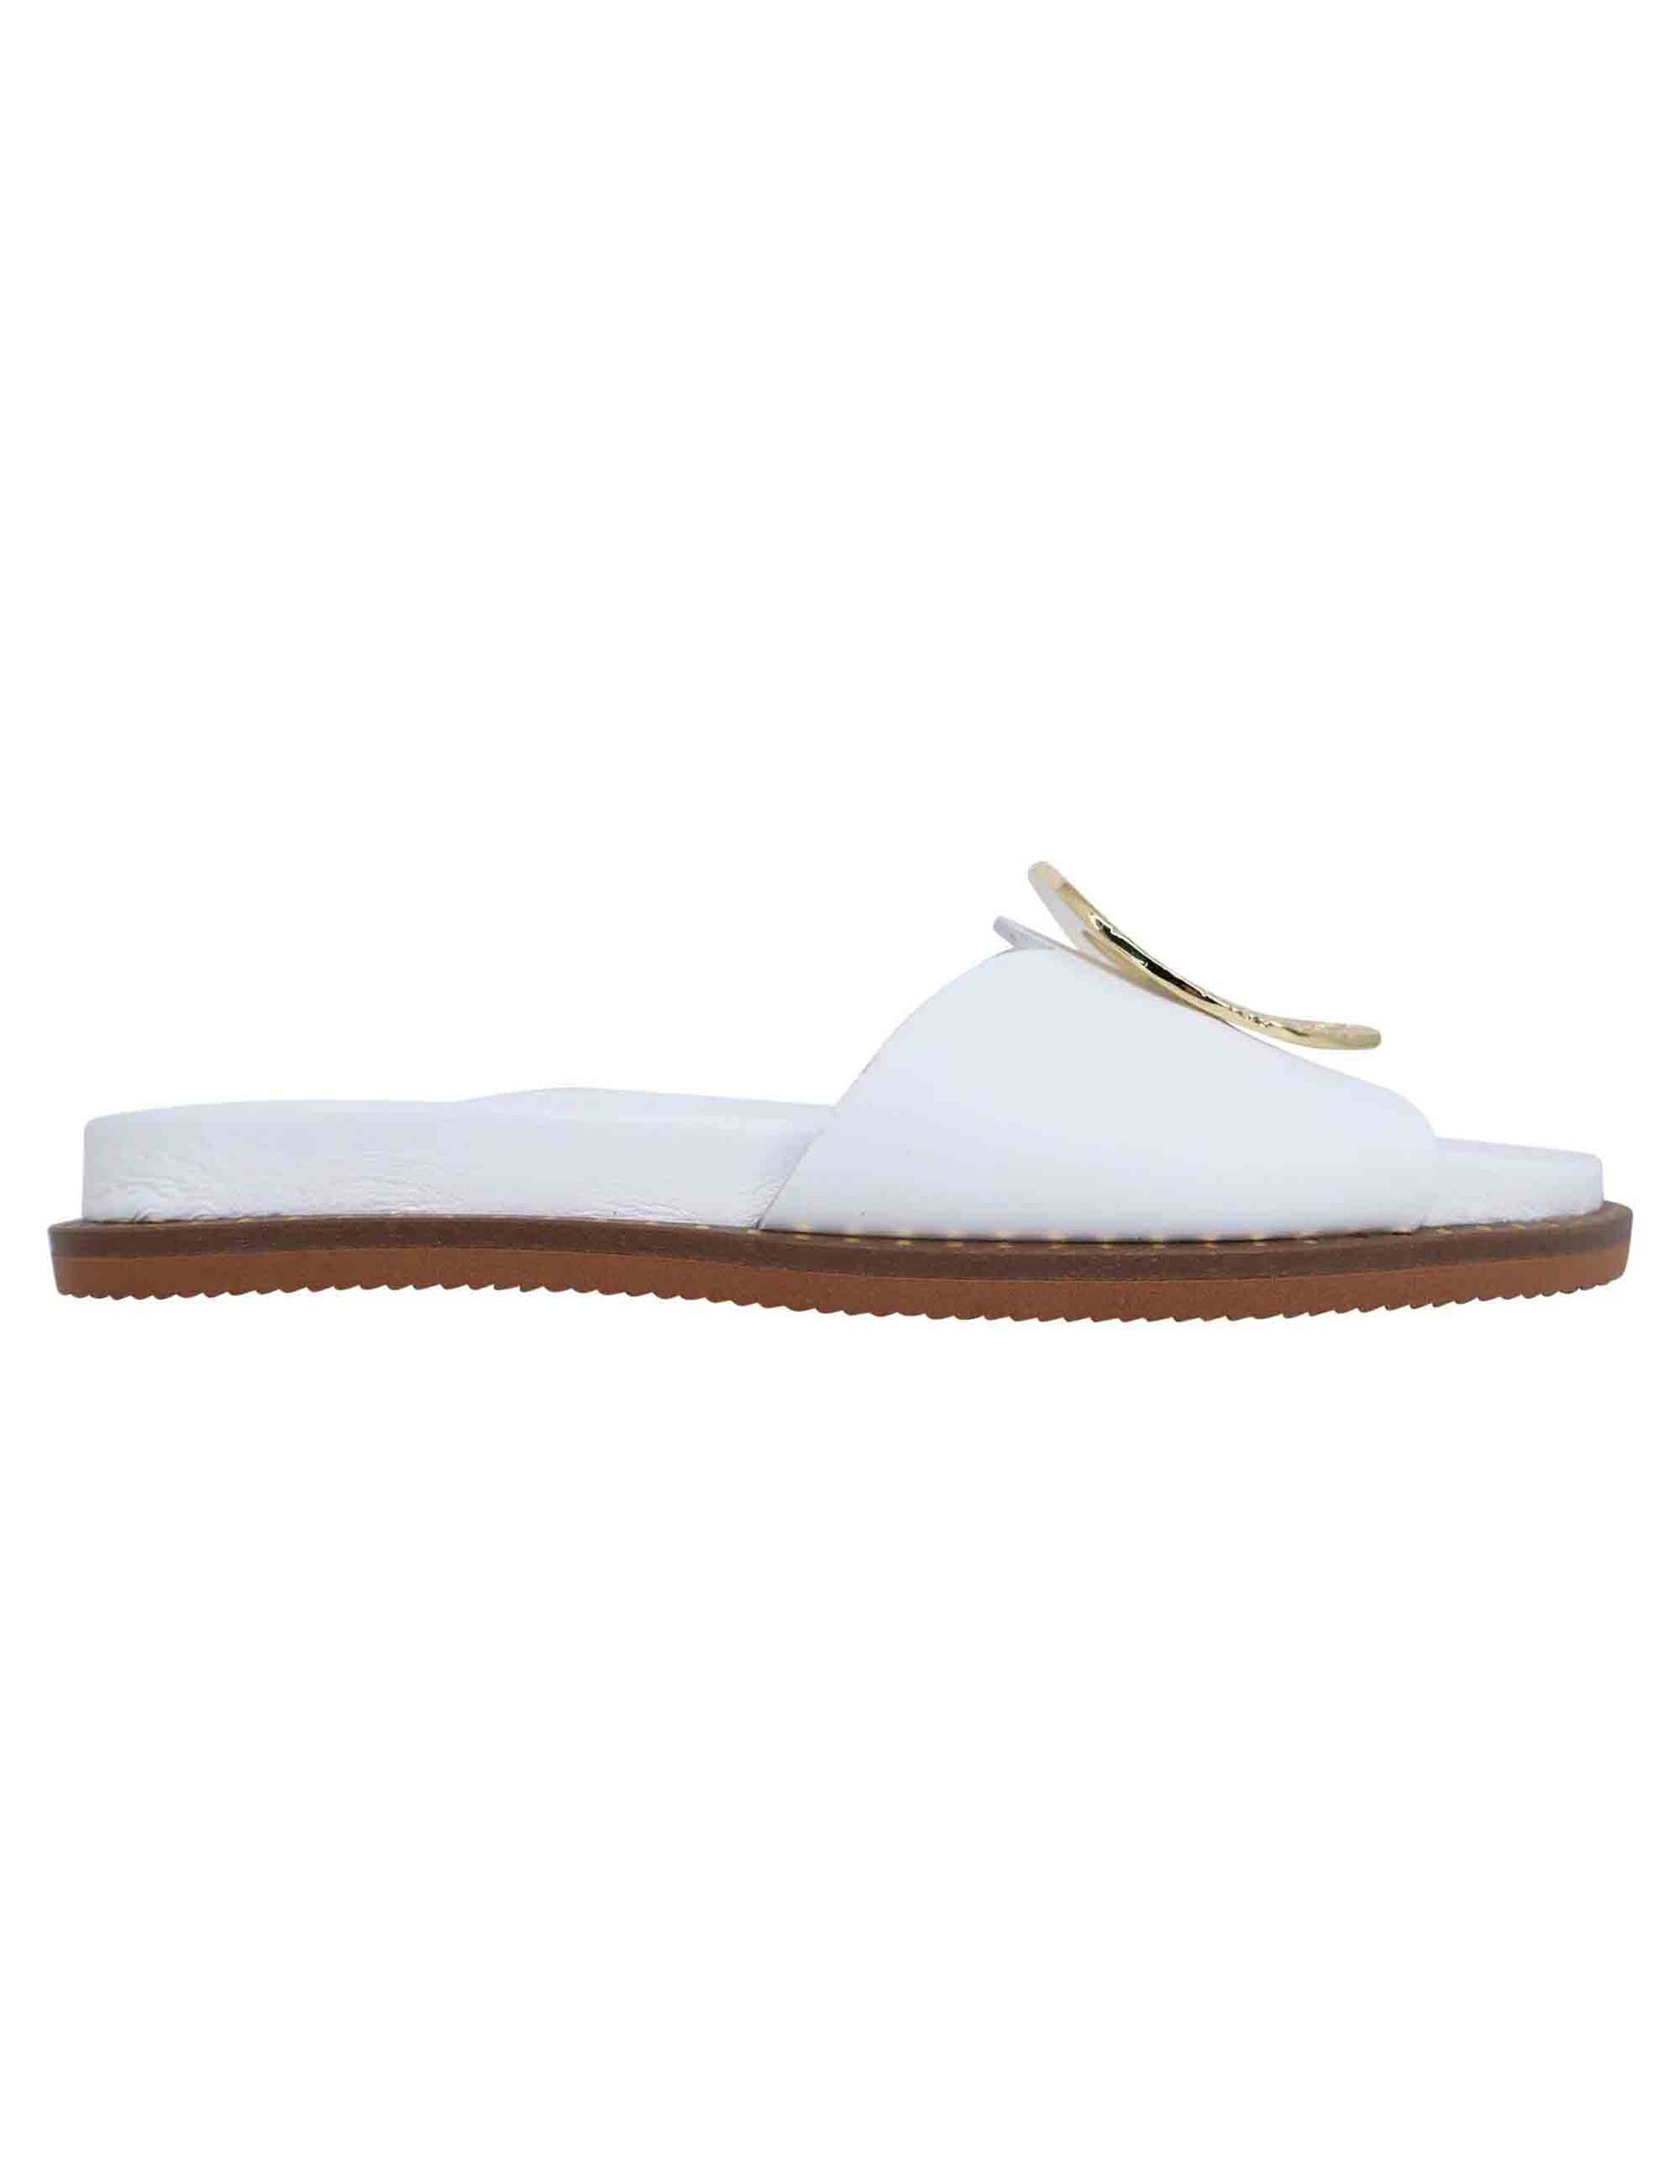 Flat women's sandals in white leather with fussbett and gold buckle